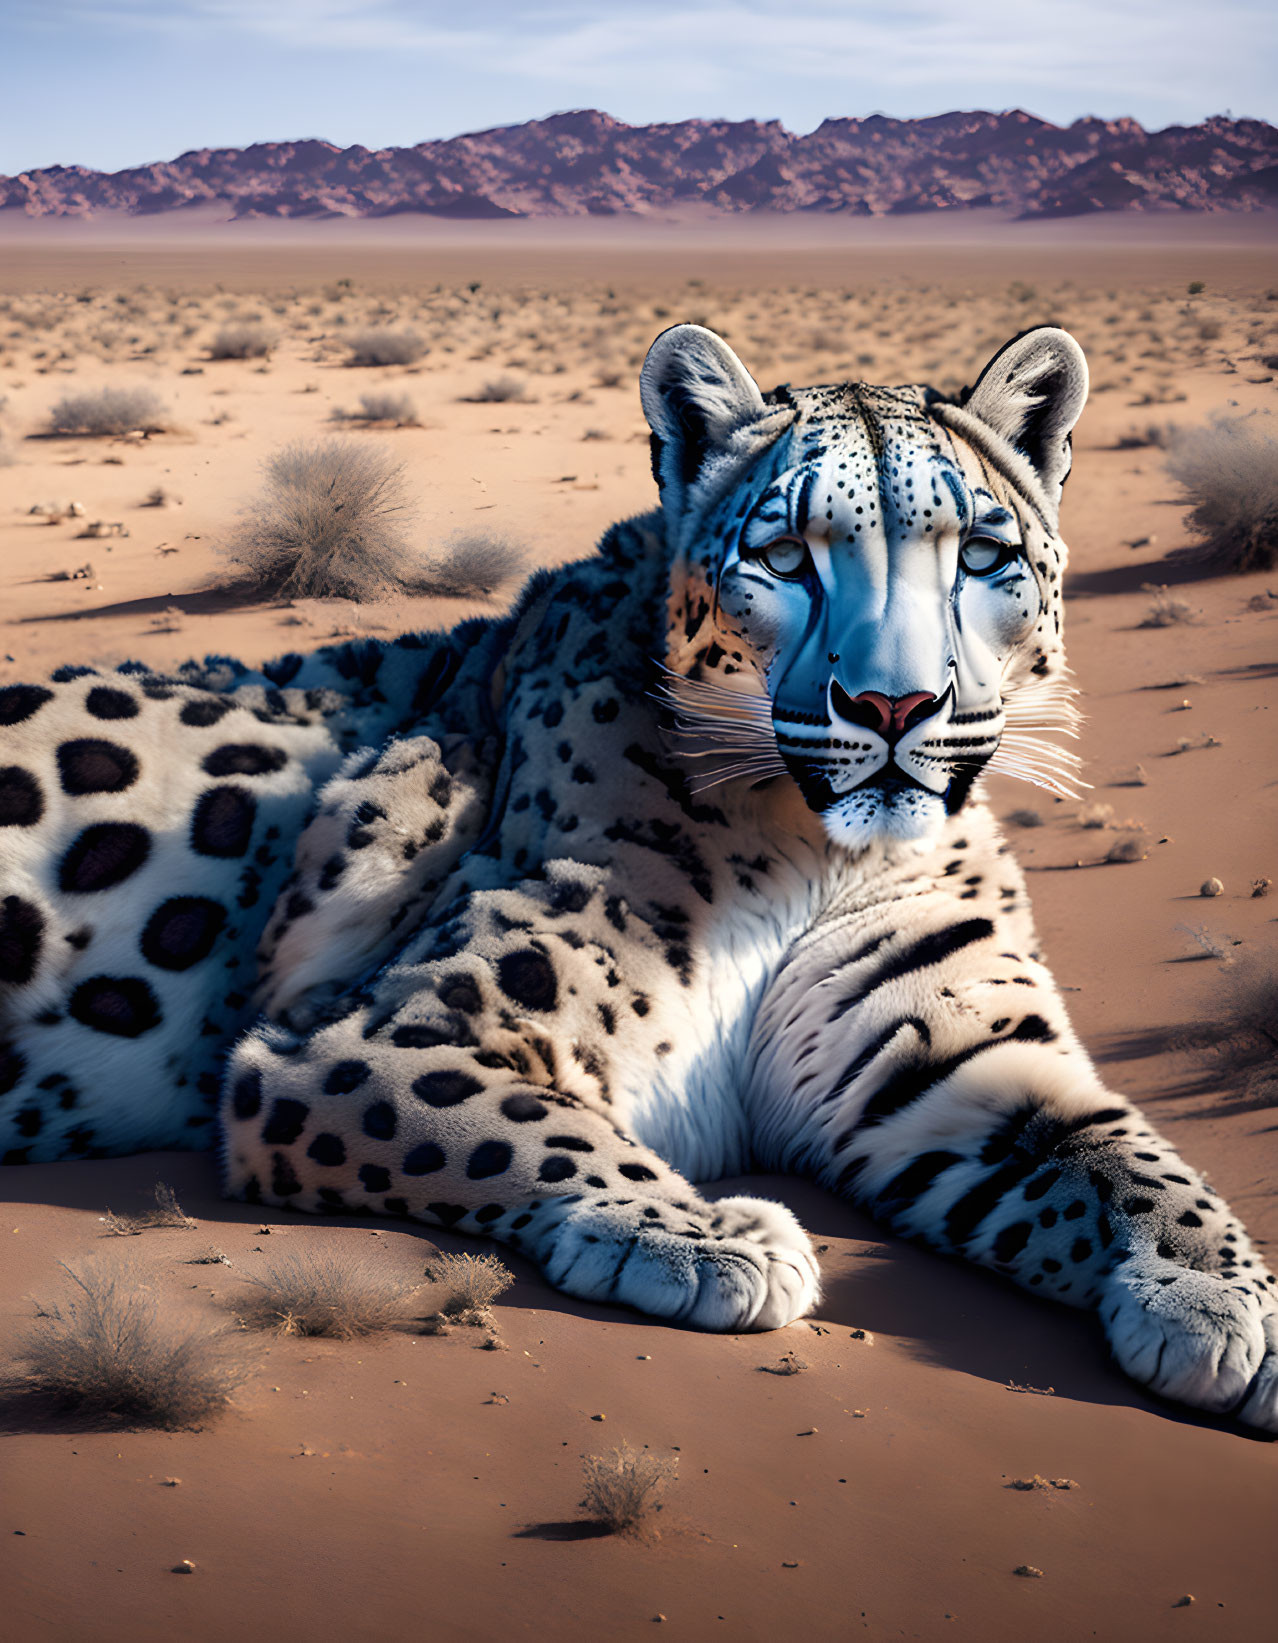 Hybrid creature with snow leopard body and white tiger face on desert sands